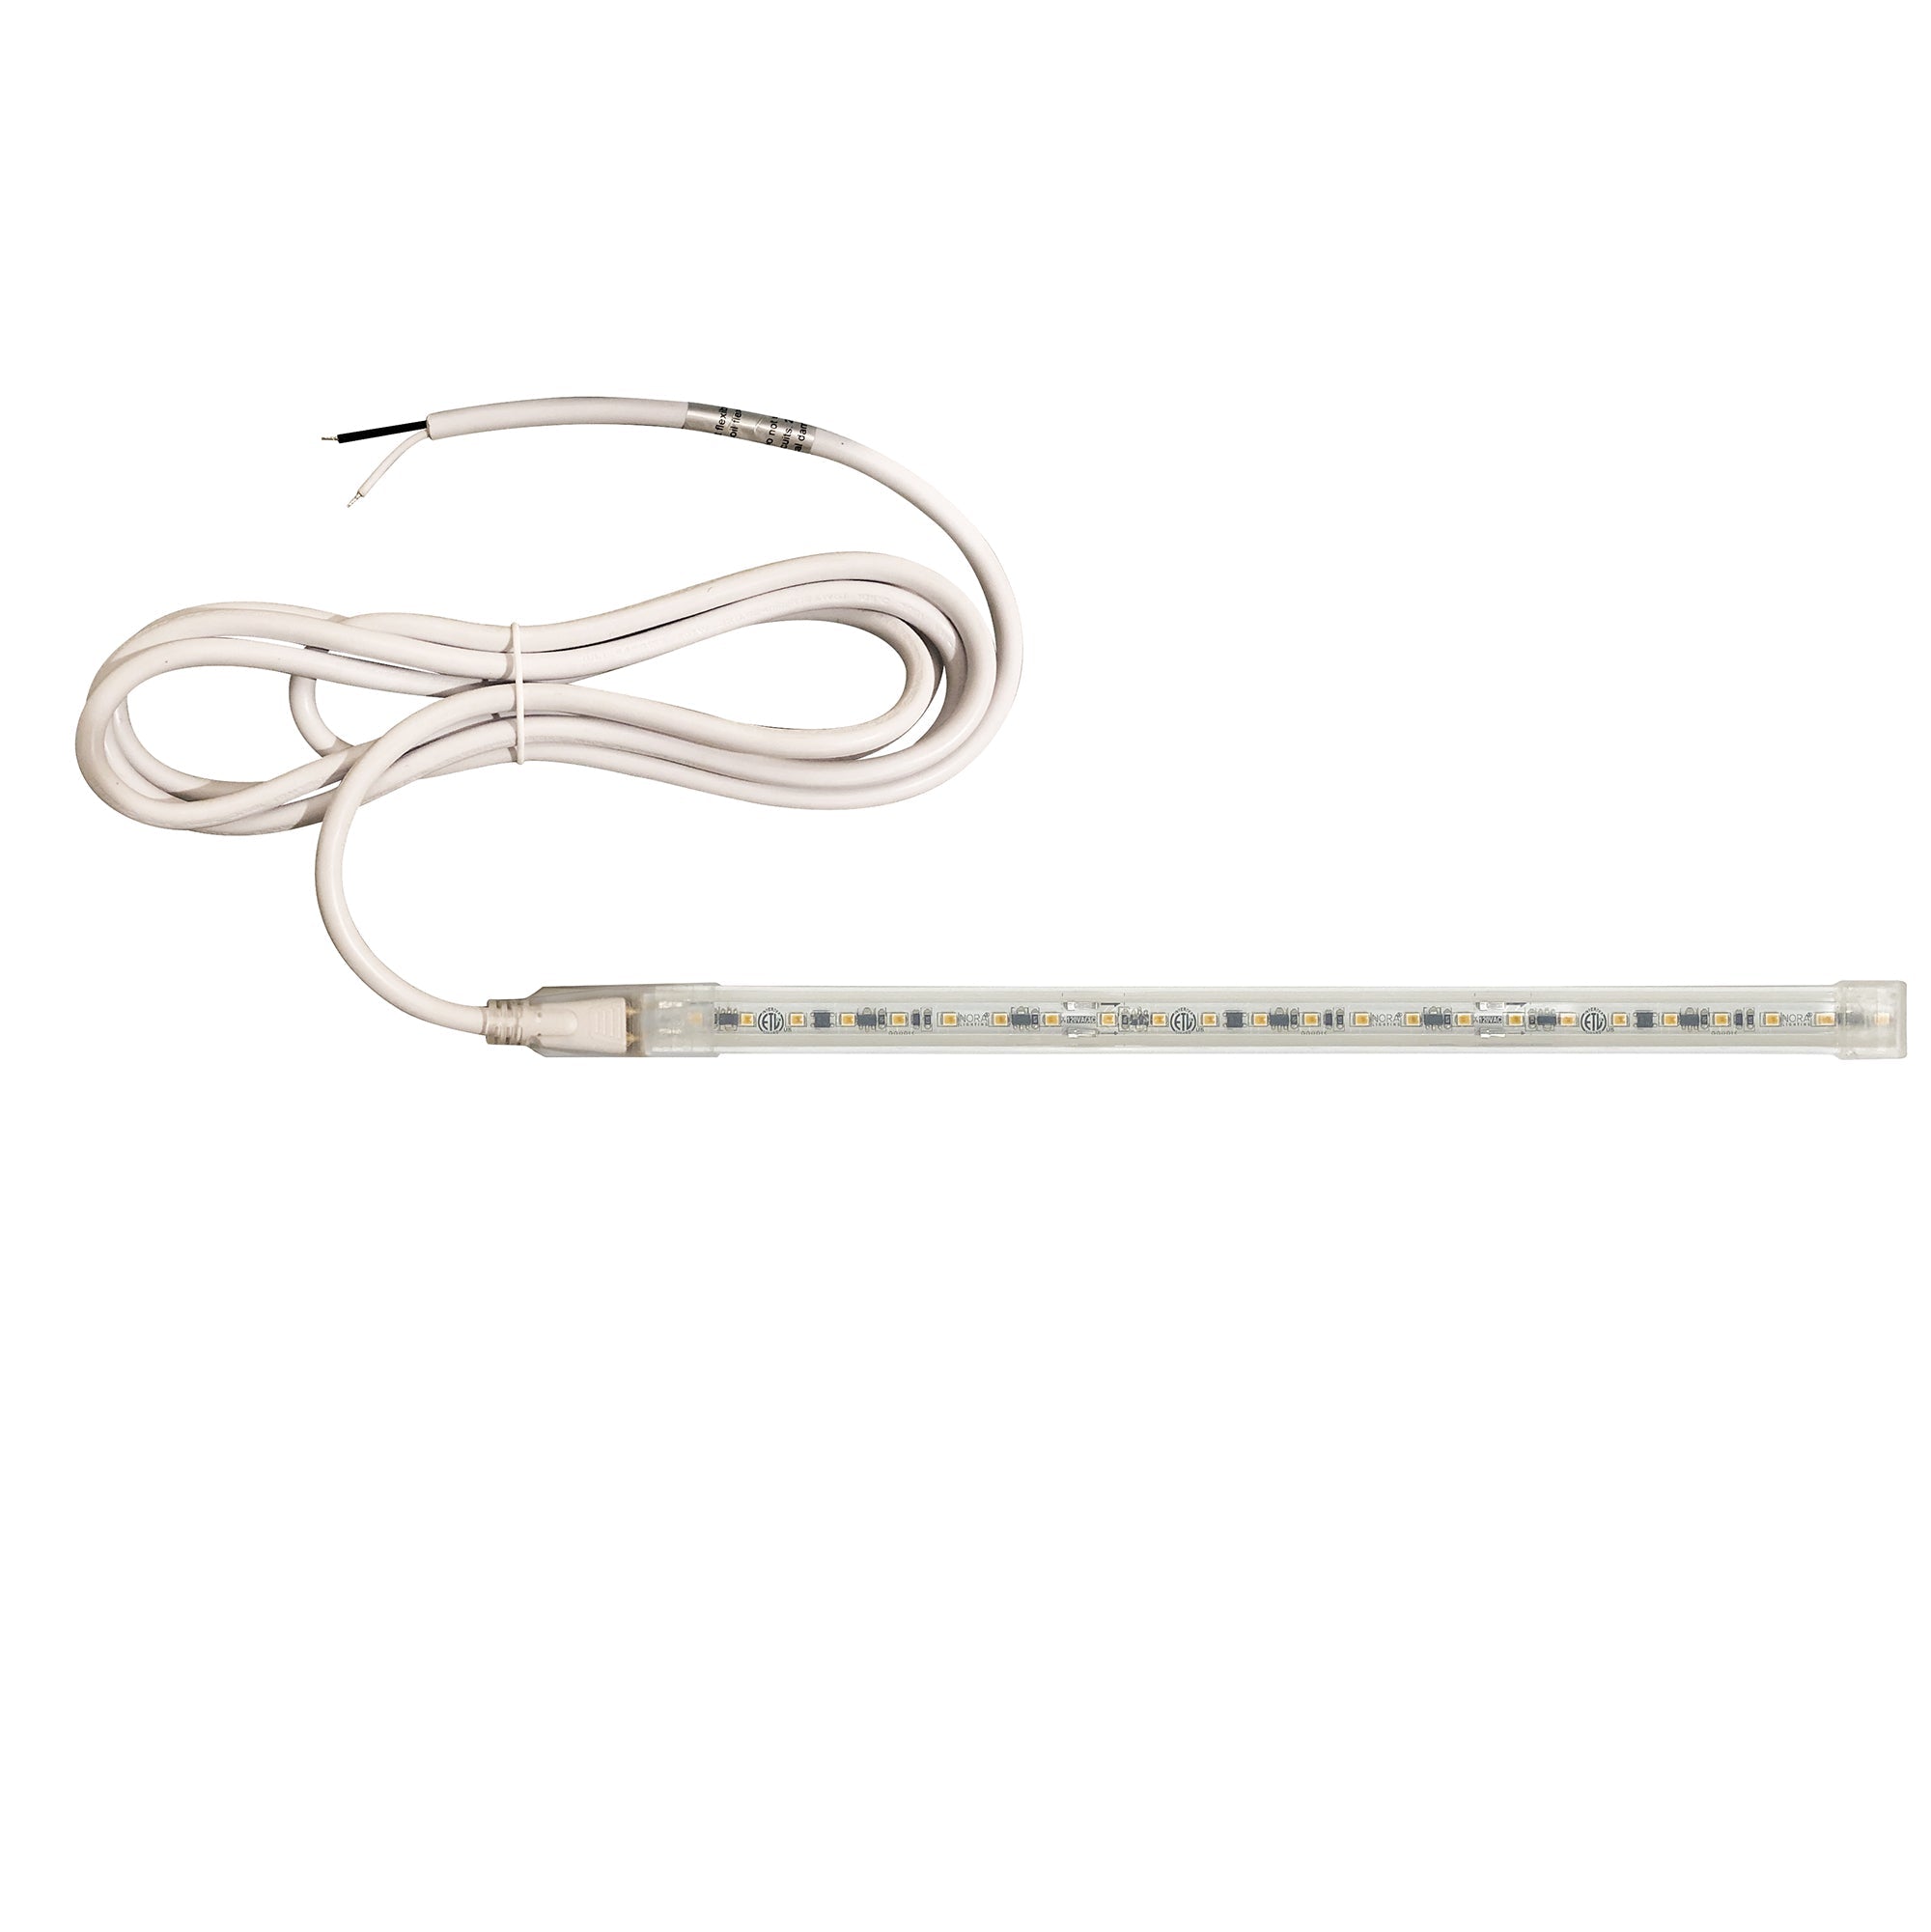 Nora Lighting NUTP13-W64-12-930/HW - Accent / Undercabinet - Custom Cut 64-ft 120V Continuous LED Tape Light, 330lm / 3.6W per foot, 3000K, w/ Mounting Clips and 8' Hardwired Power Cord